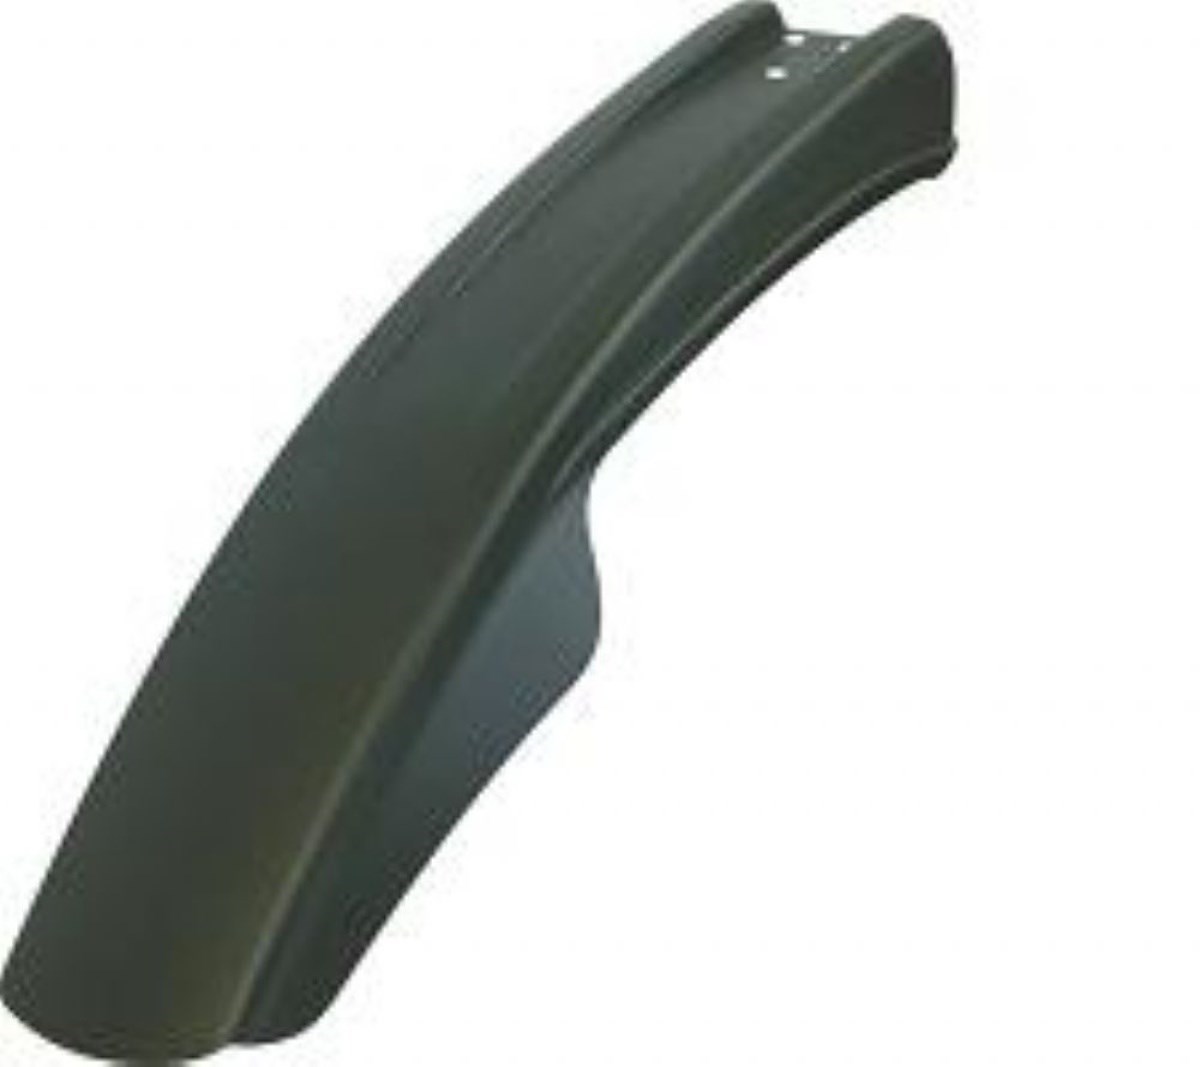 Giant FX Rear Mudguard product image